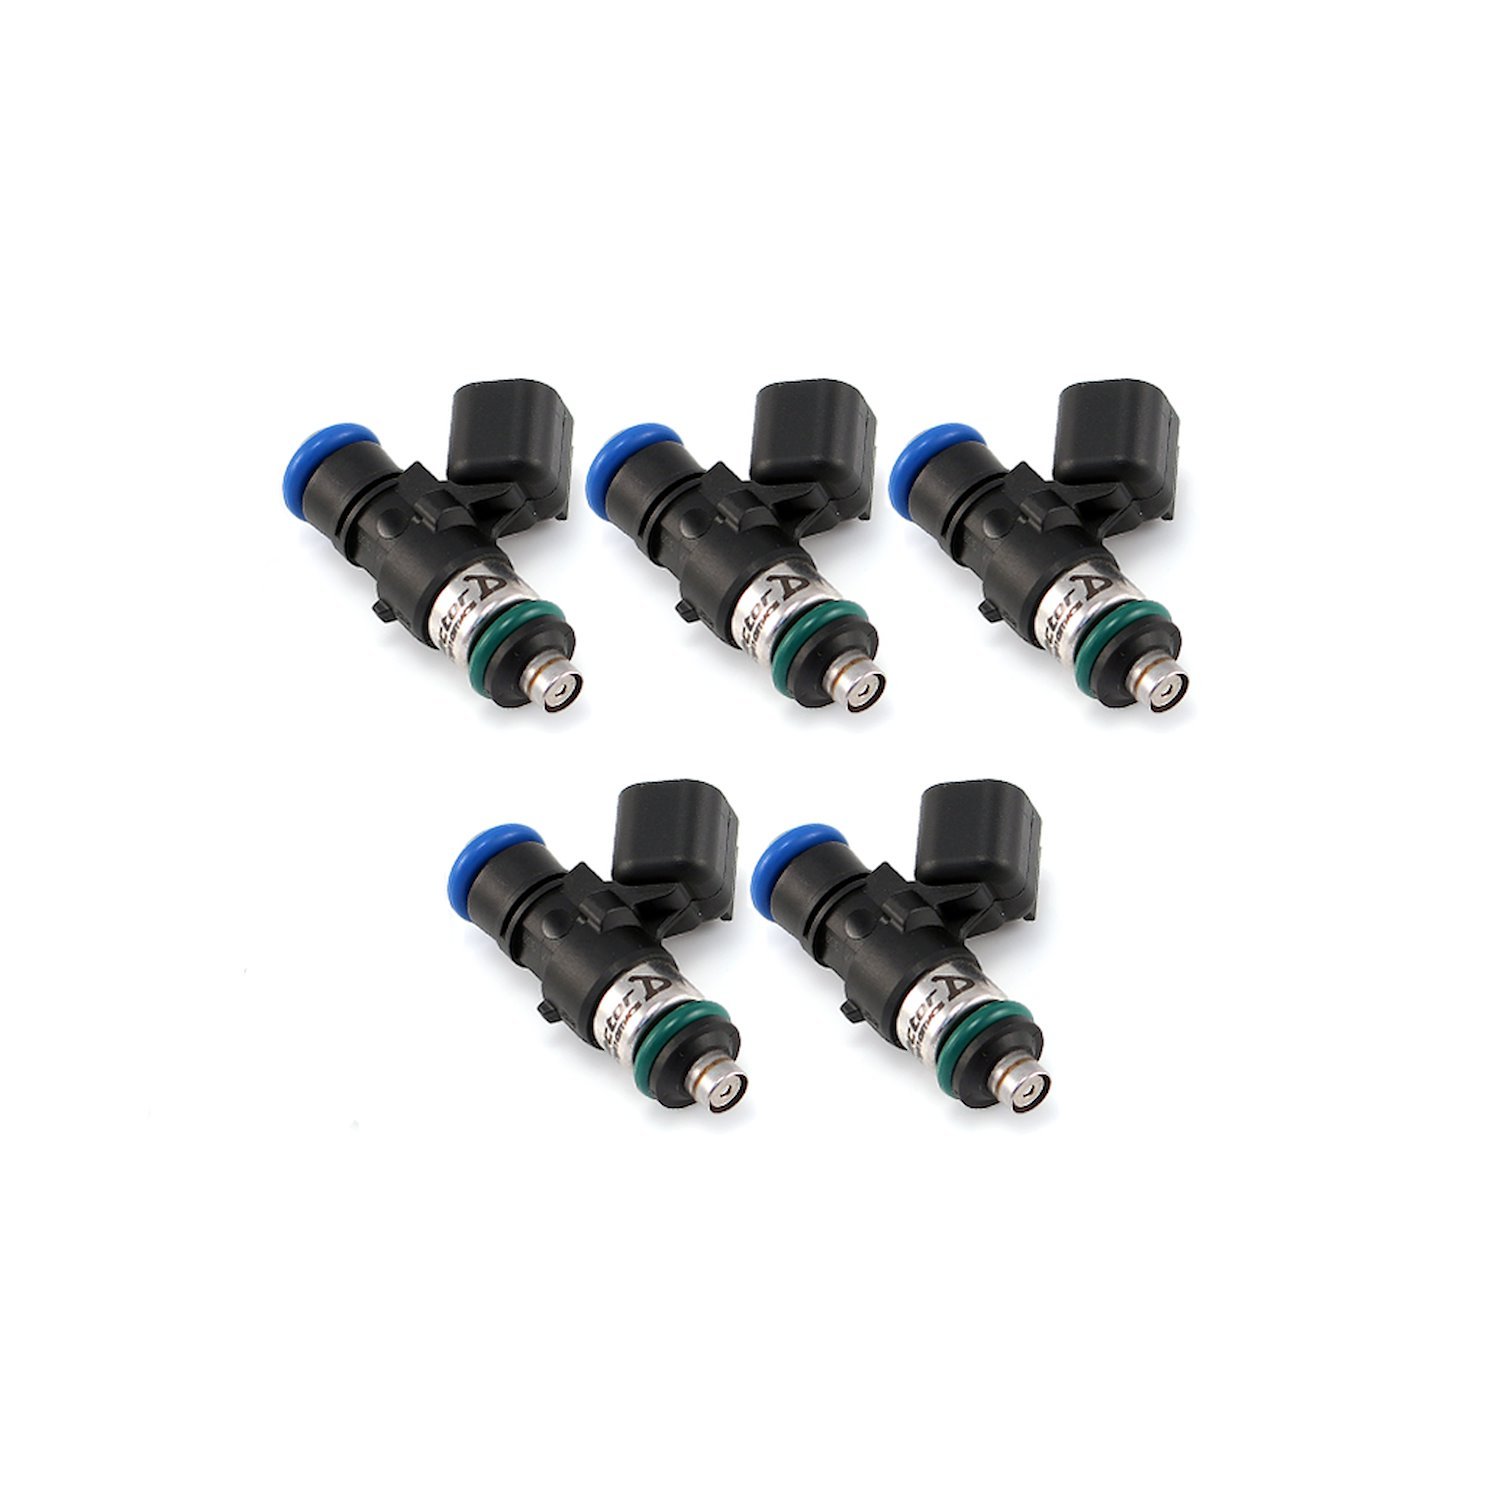 1050.34.14.14.5 1050cc Fuel Injector Set, 34 mm Length (No Adapters), 14 mm Lower O-Ring